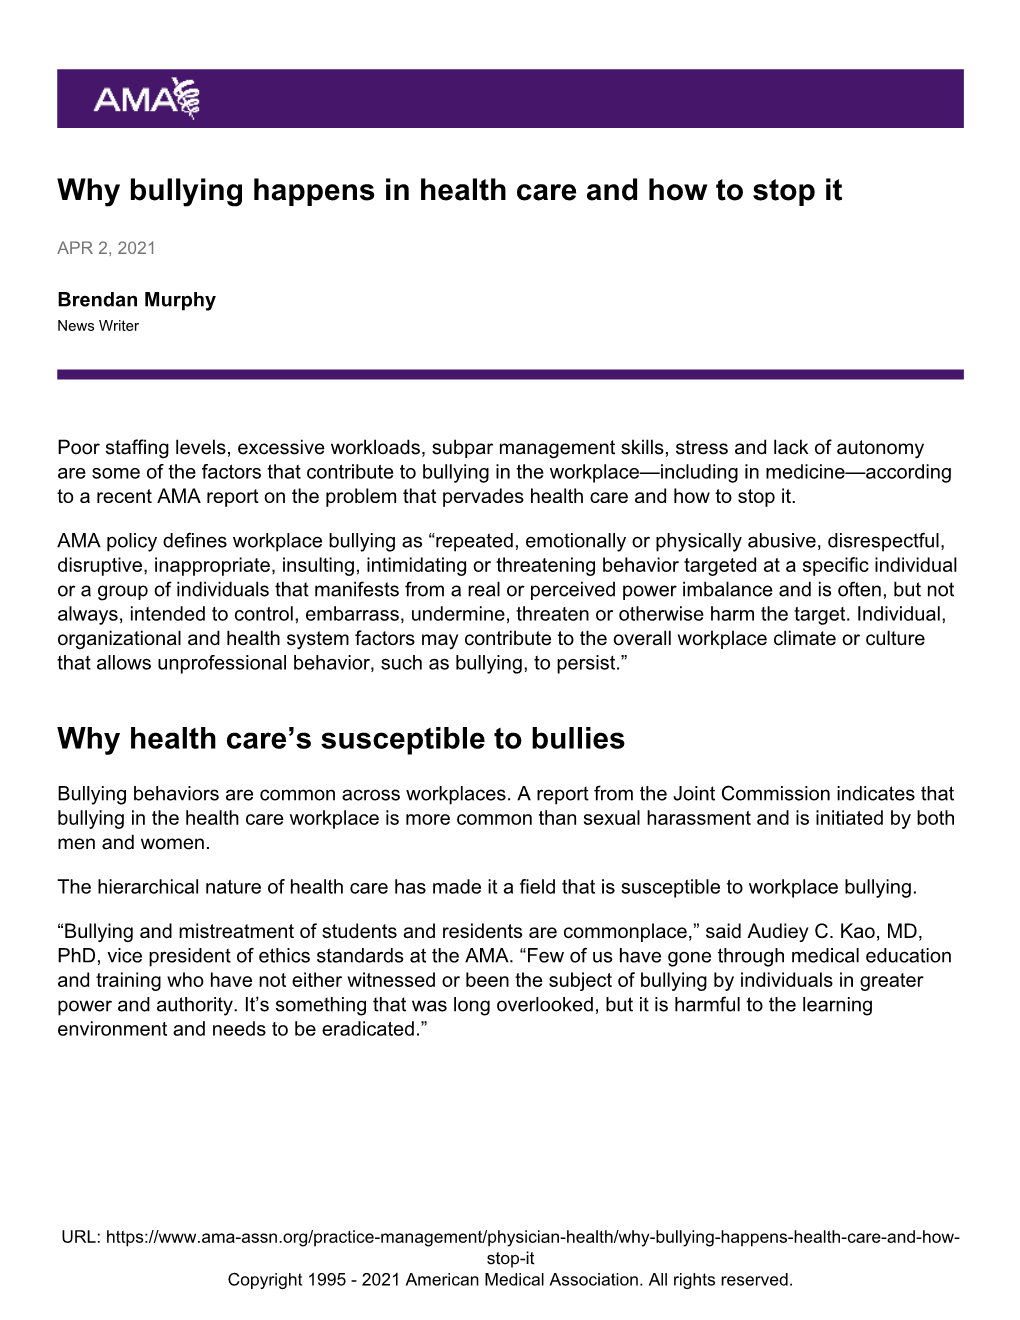 Why Bullying Happens in Health Care and How to Stop It